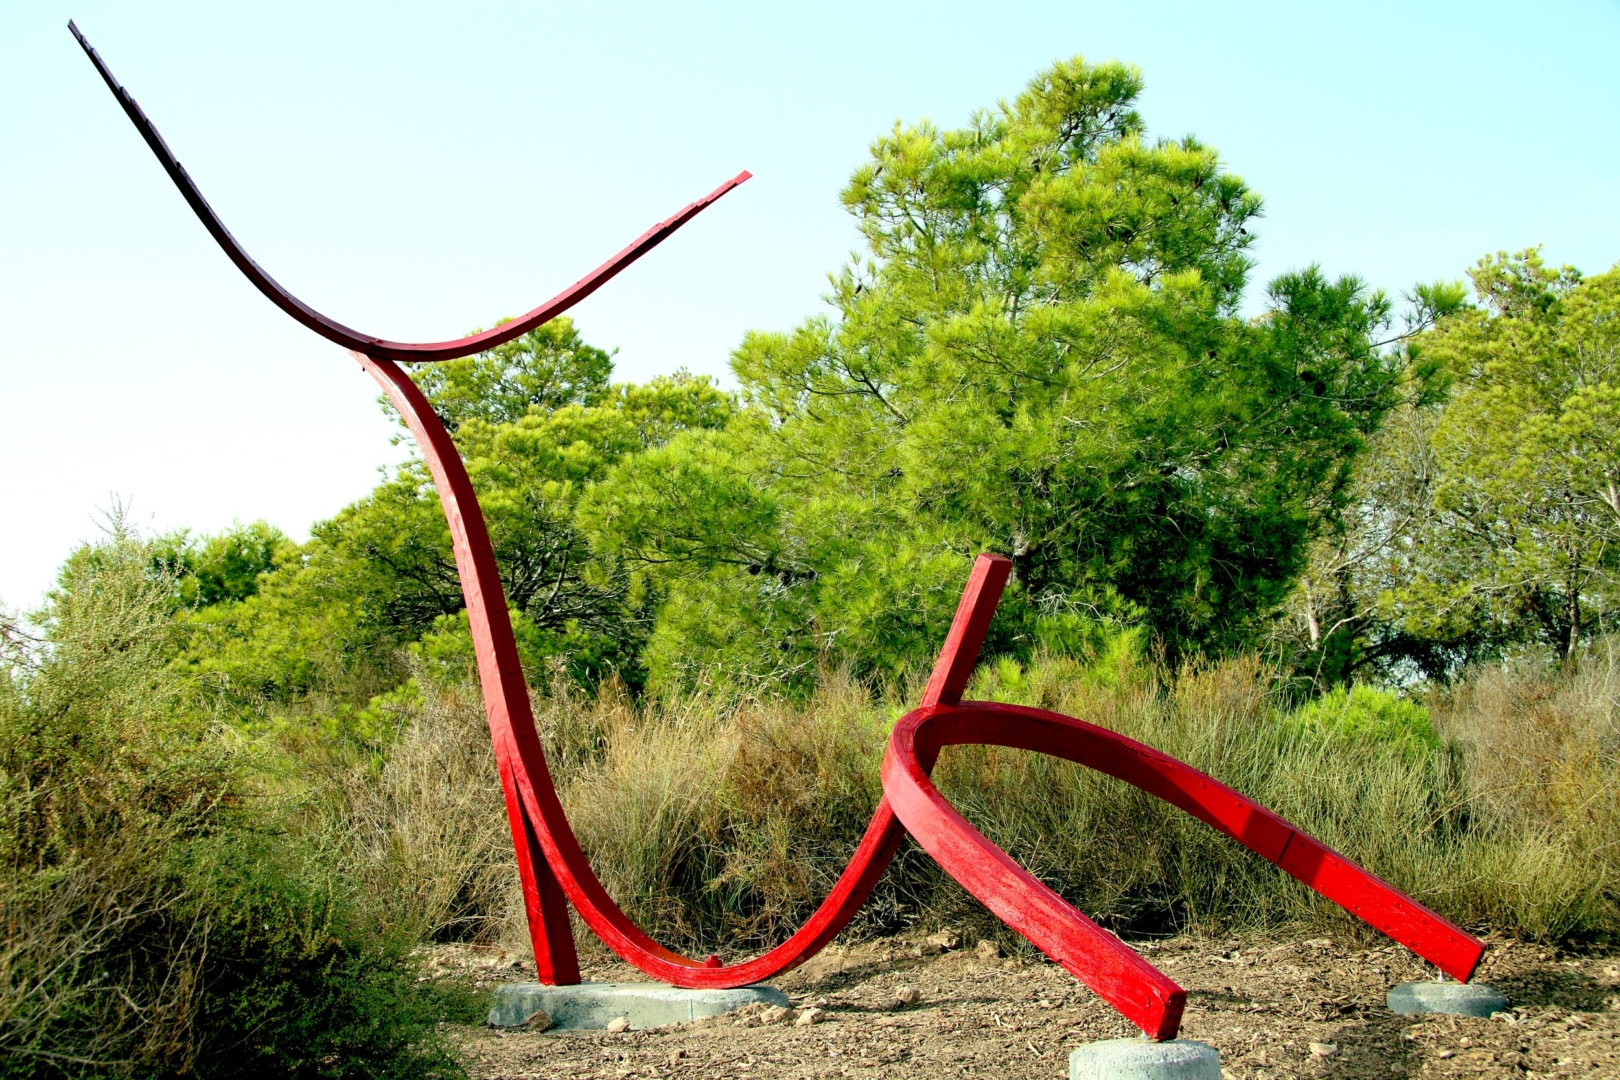 A red sculpture located in the outdoors with trees surrounding it is three U-shaped metal pieces connected 